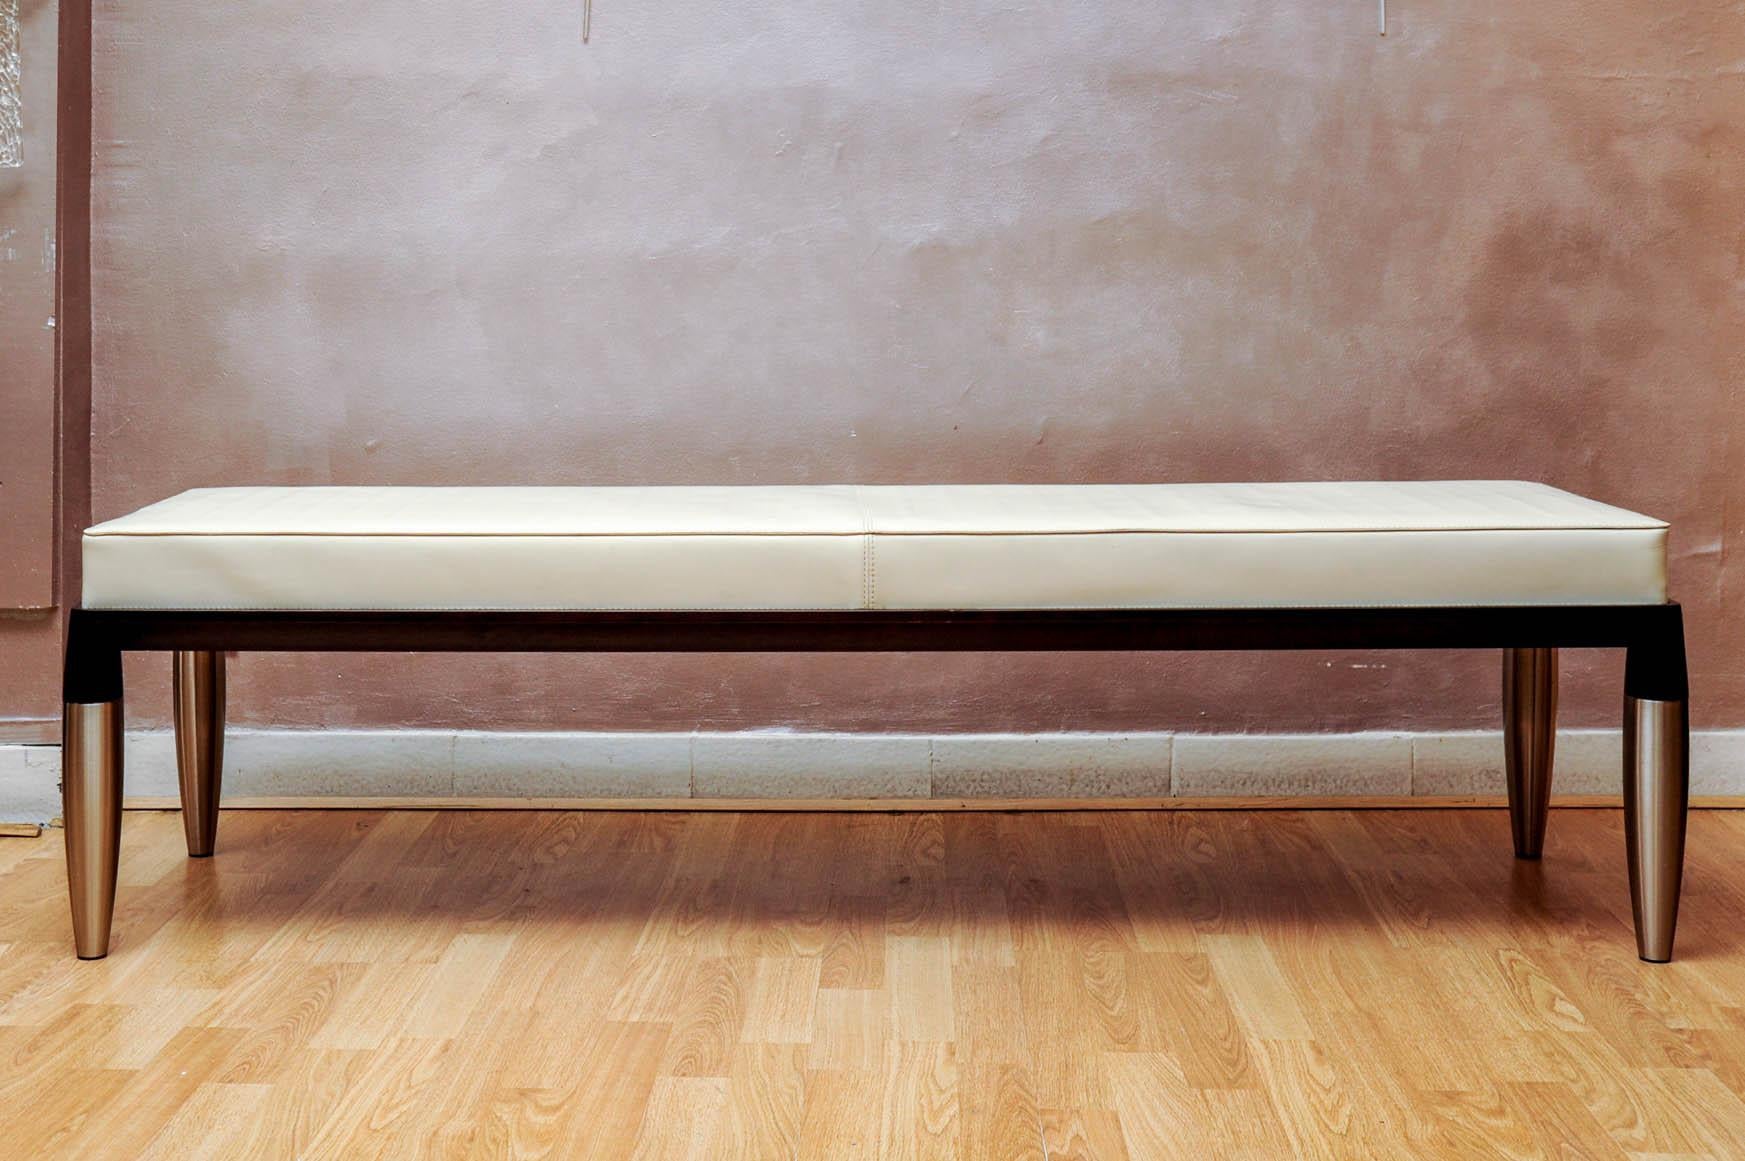 Bench covered with white leather, feet in wood and metal, signed “Giorgetti”.